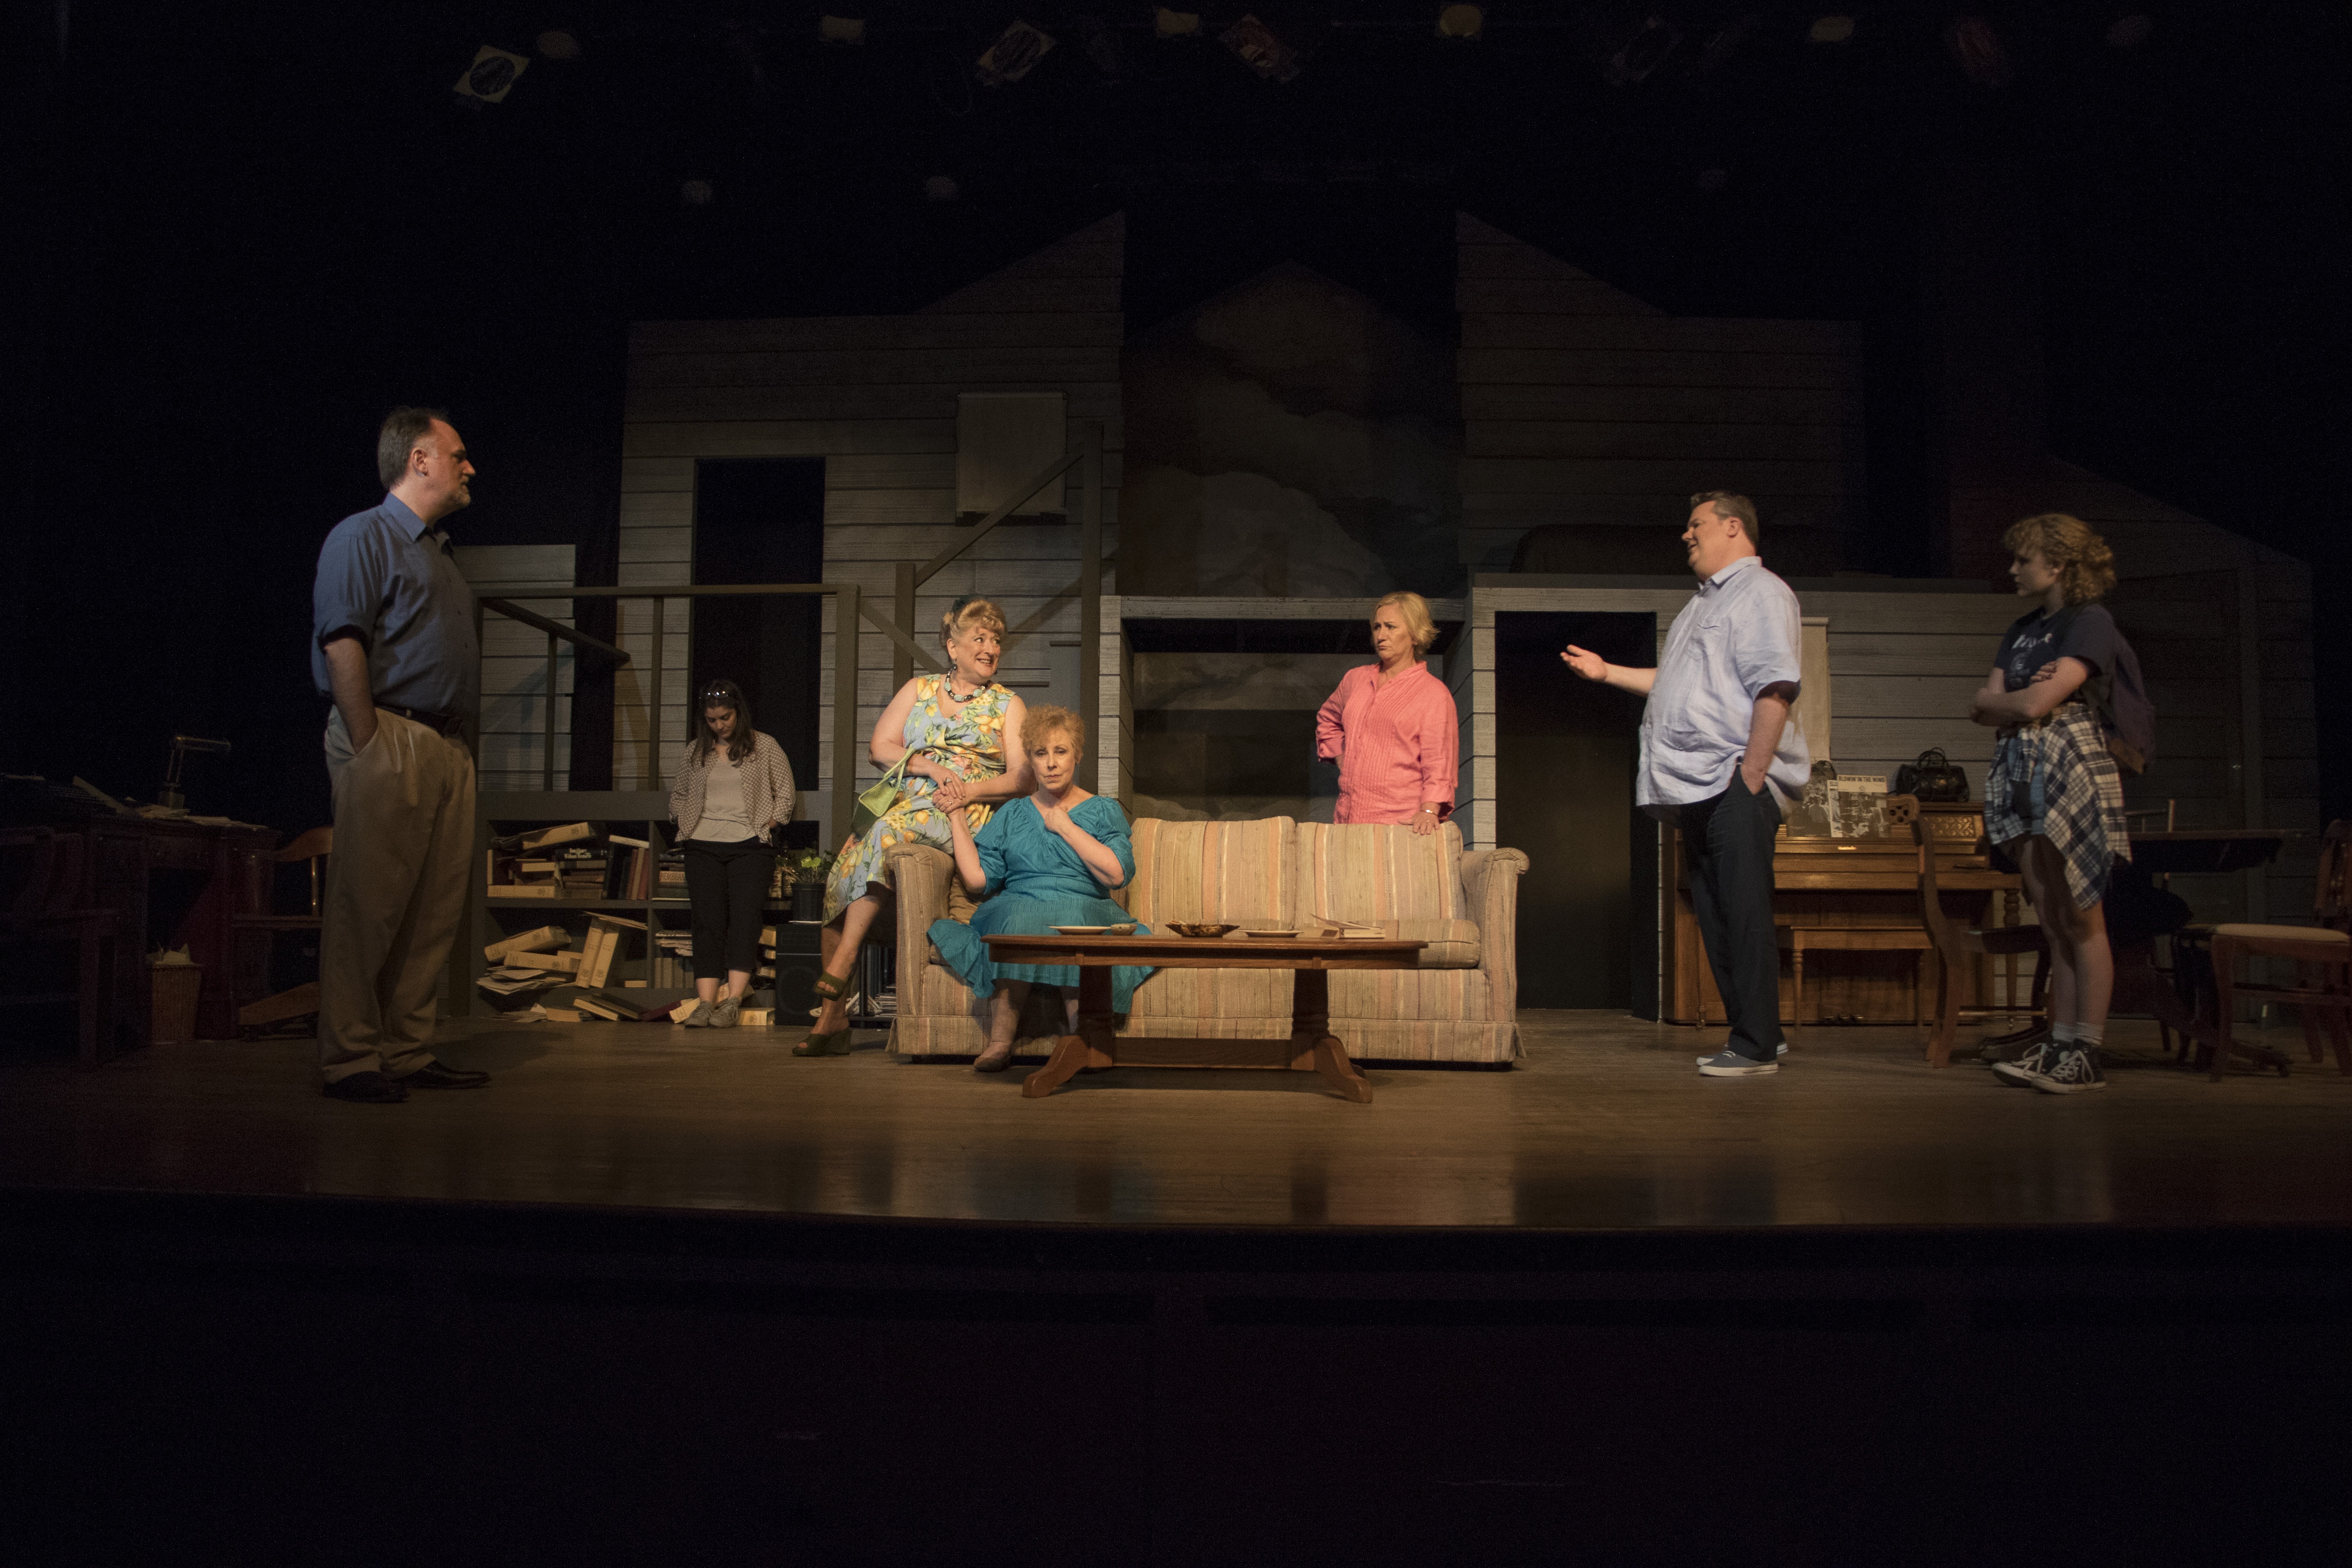 L-R: Michael Fisher, Carlotta Capuano, Gayle Nichols-Grimes, Diane Sams, Nicky McDonnell, Tom Flatt, and Camille Neumann in August: Osage County, now playing at the Little Theatre of Alexandria. Photo by Matt Liptak.